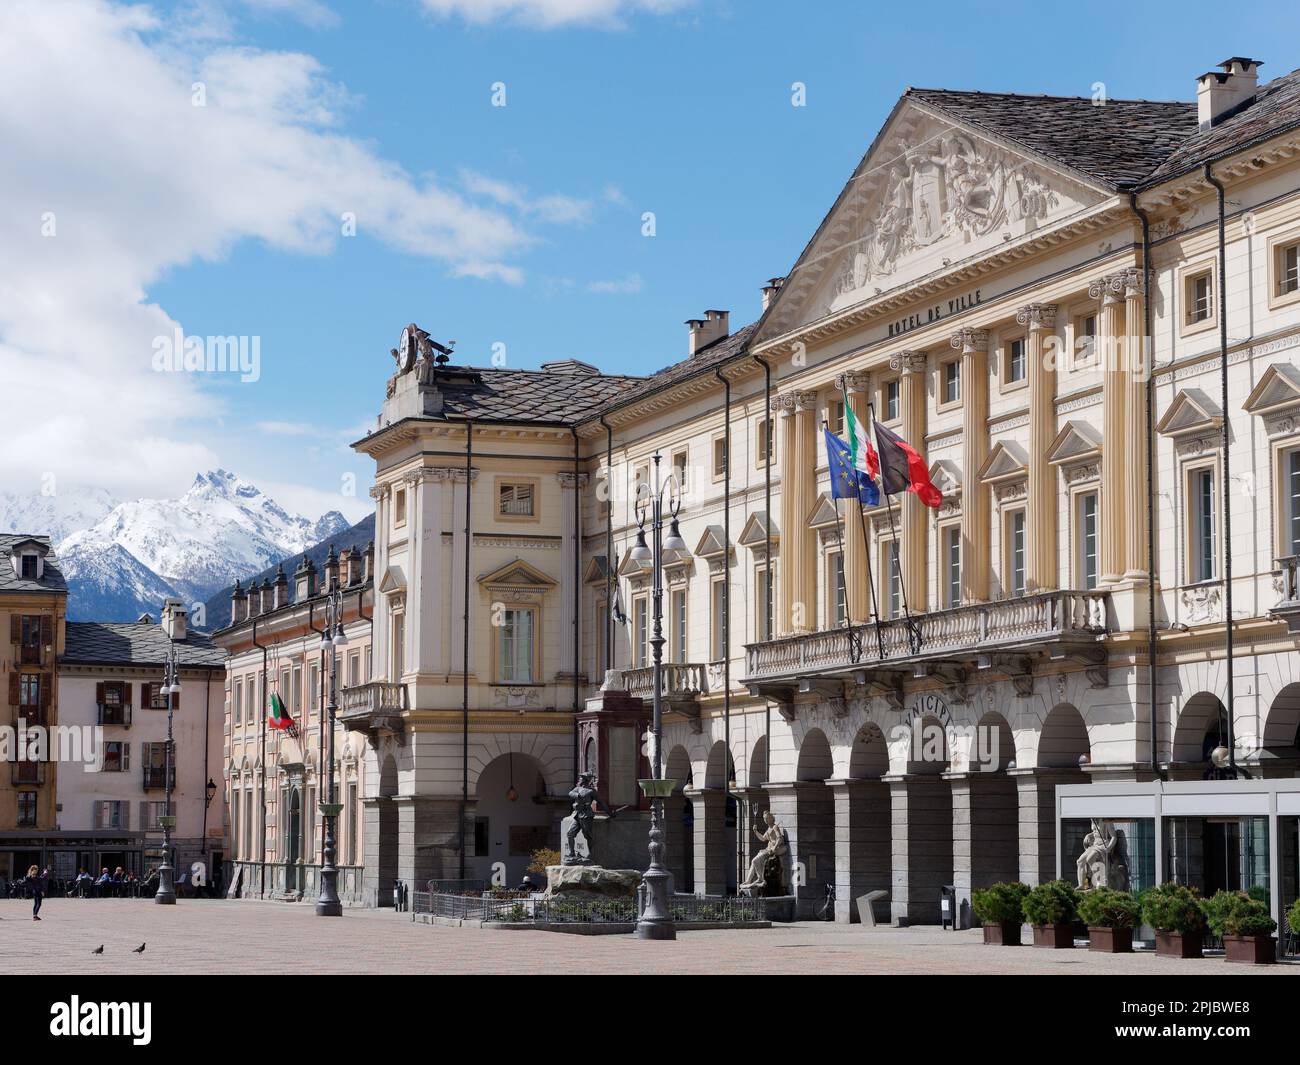 The main square in Aosta, Piazza Emile Chanoux, with the Town Hall on the right. Aosta Valley Italy Stock Photo